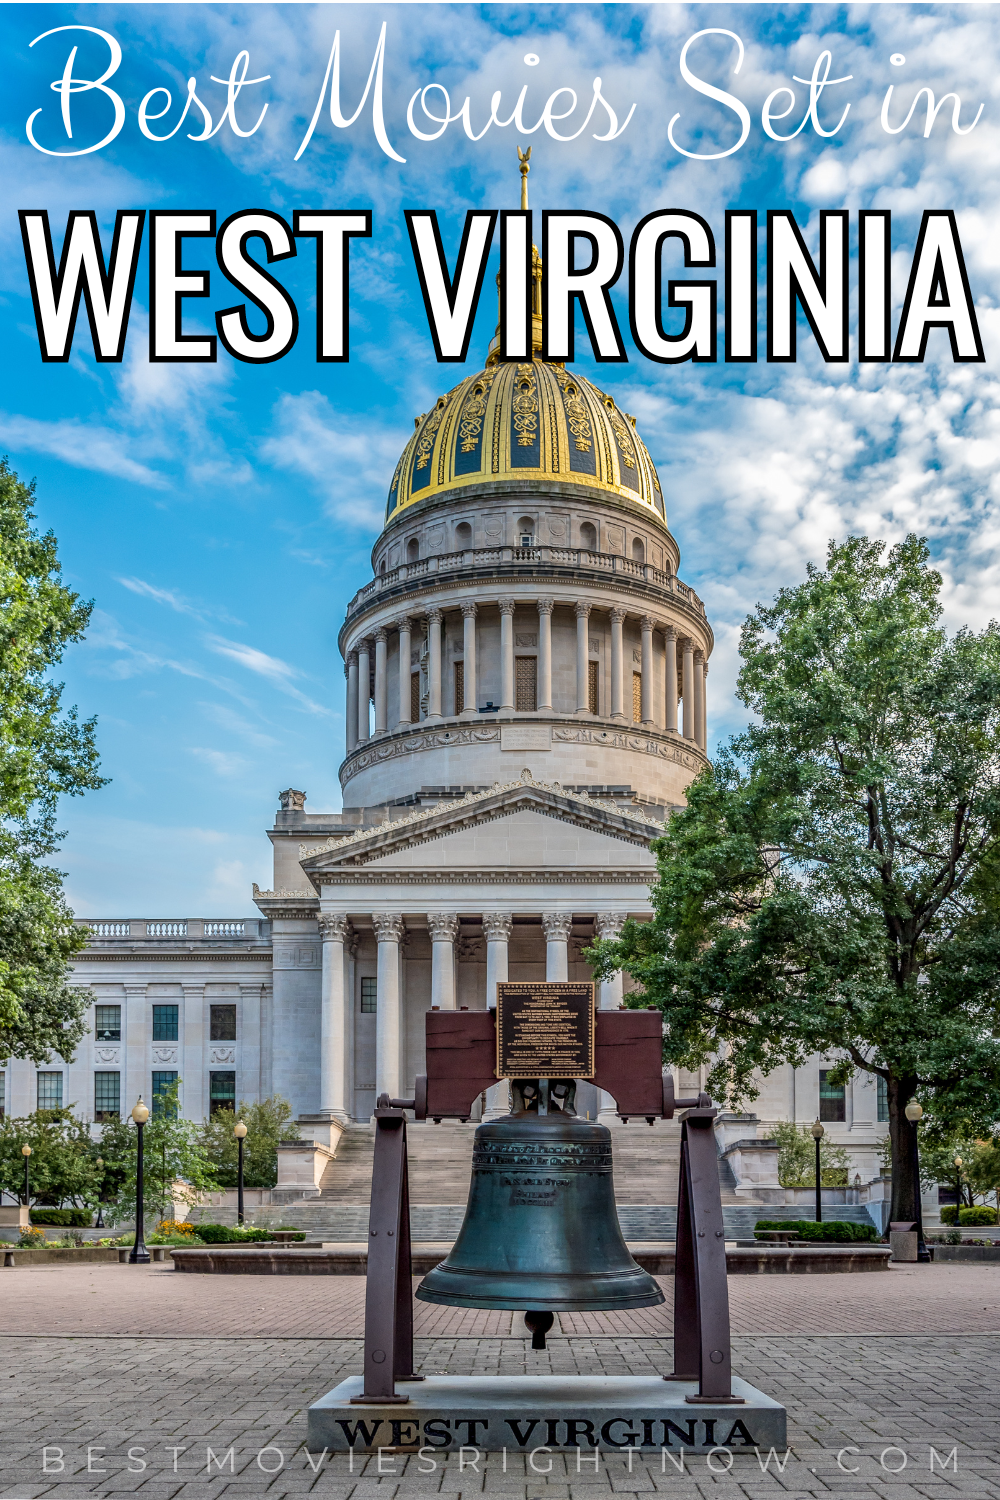 West Virginia Capitol Building, Charleston, West Virginia with text: 